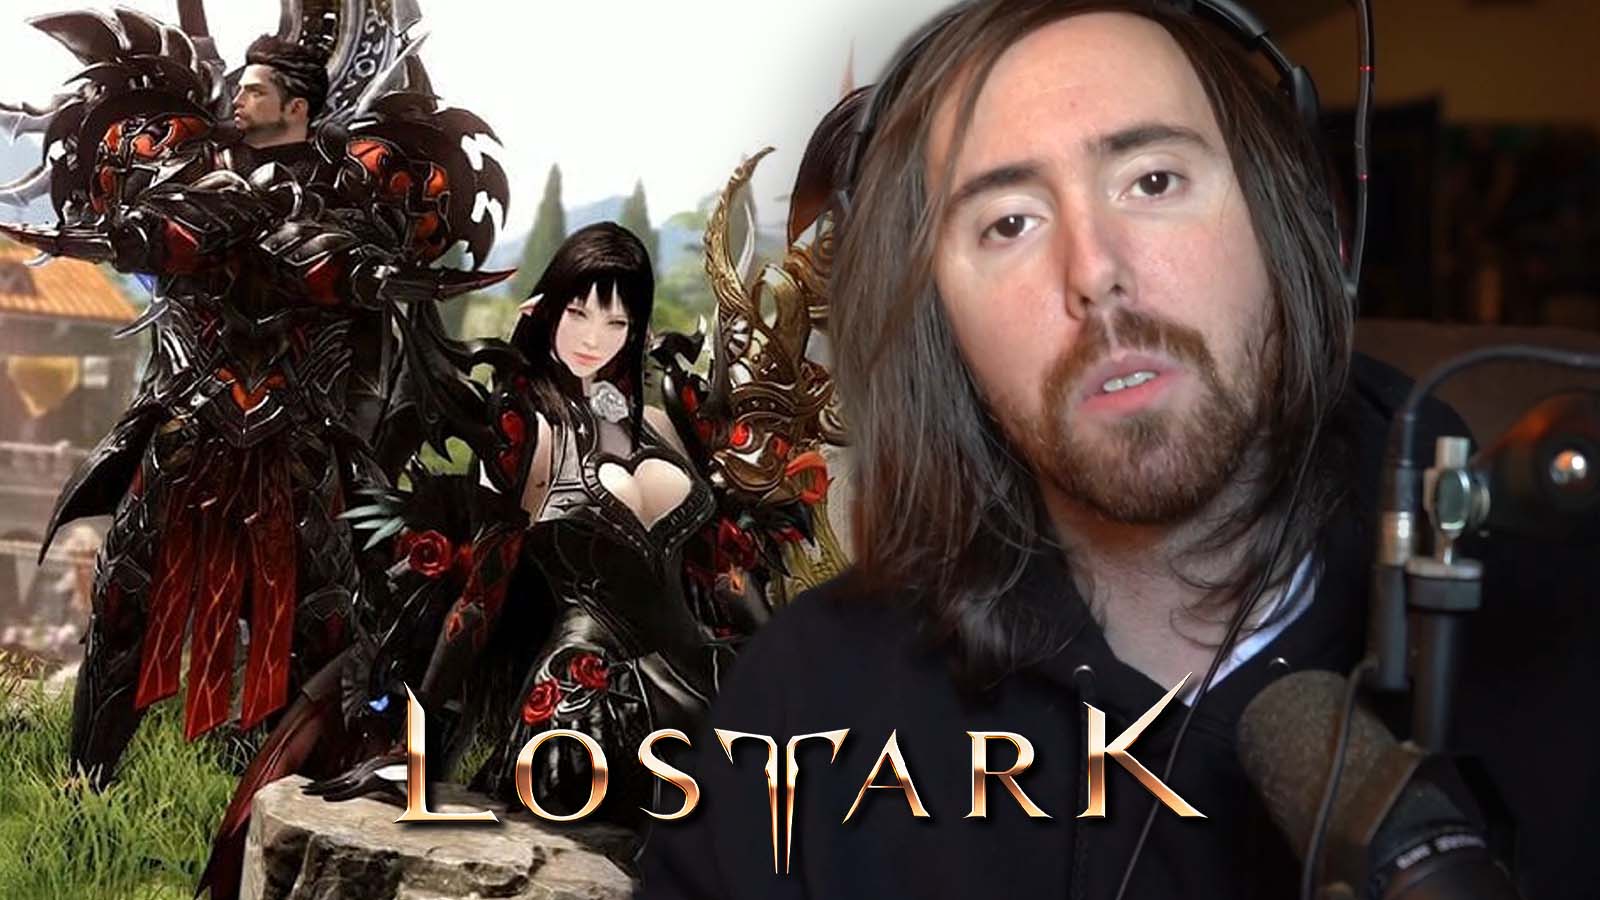 asmongold-lost-ark-rush-content-twitch